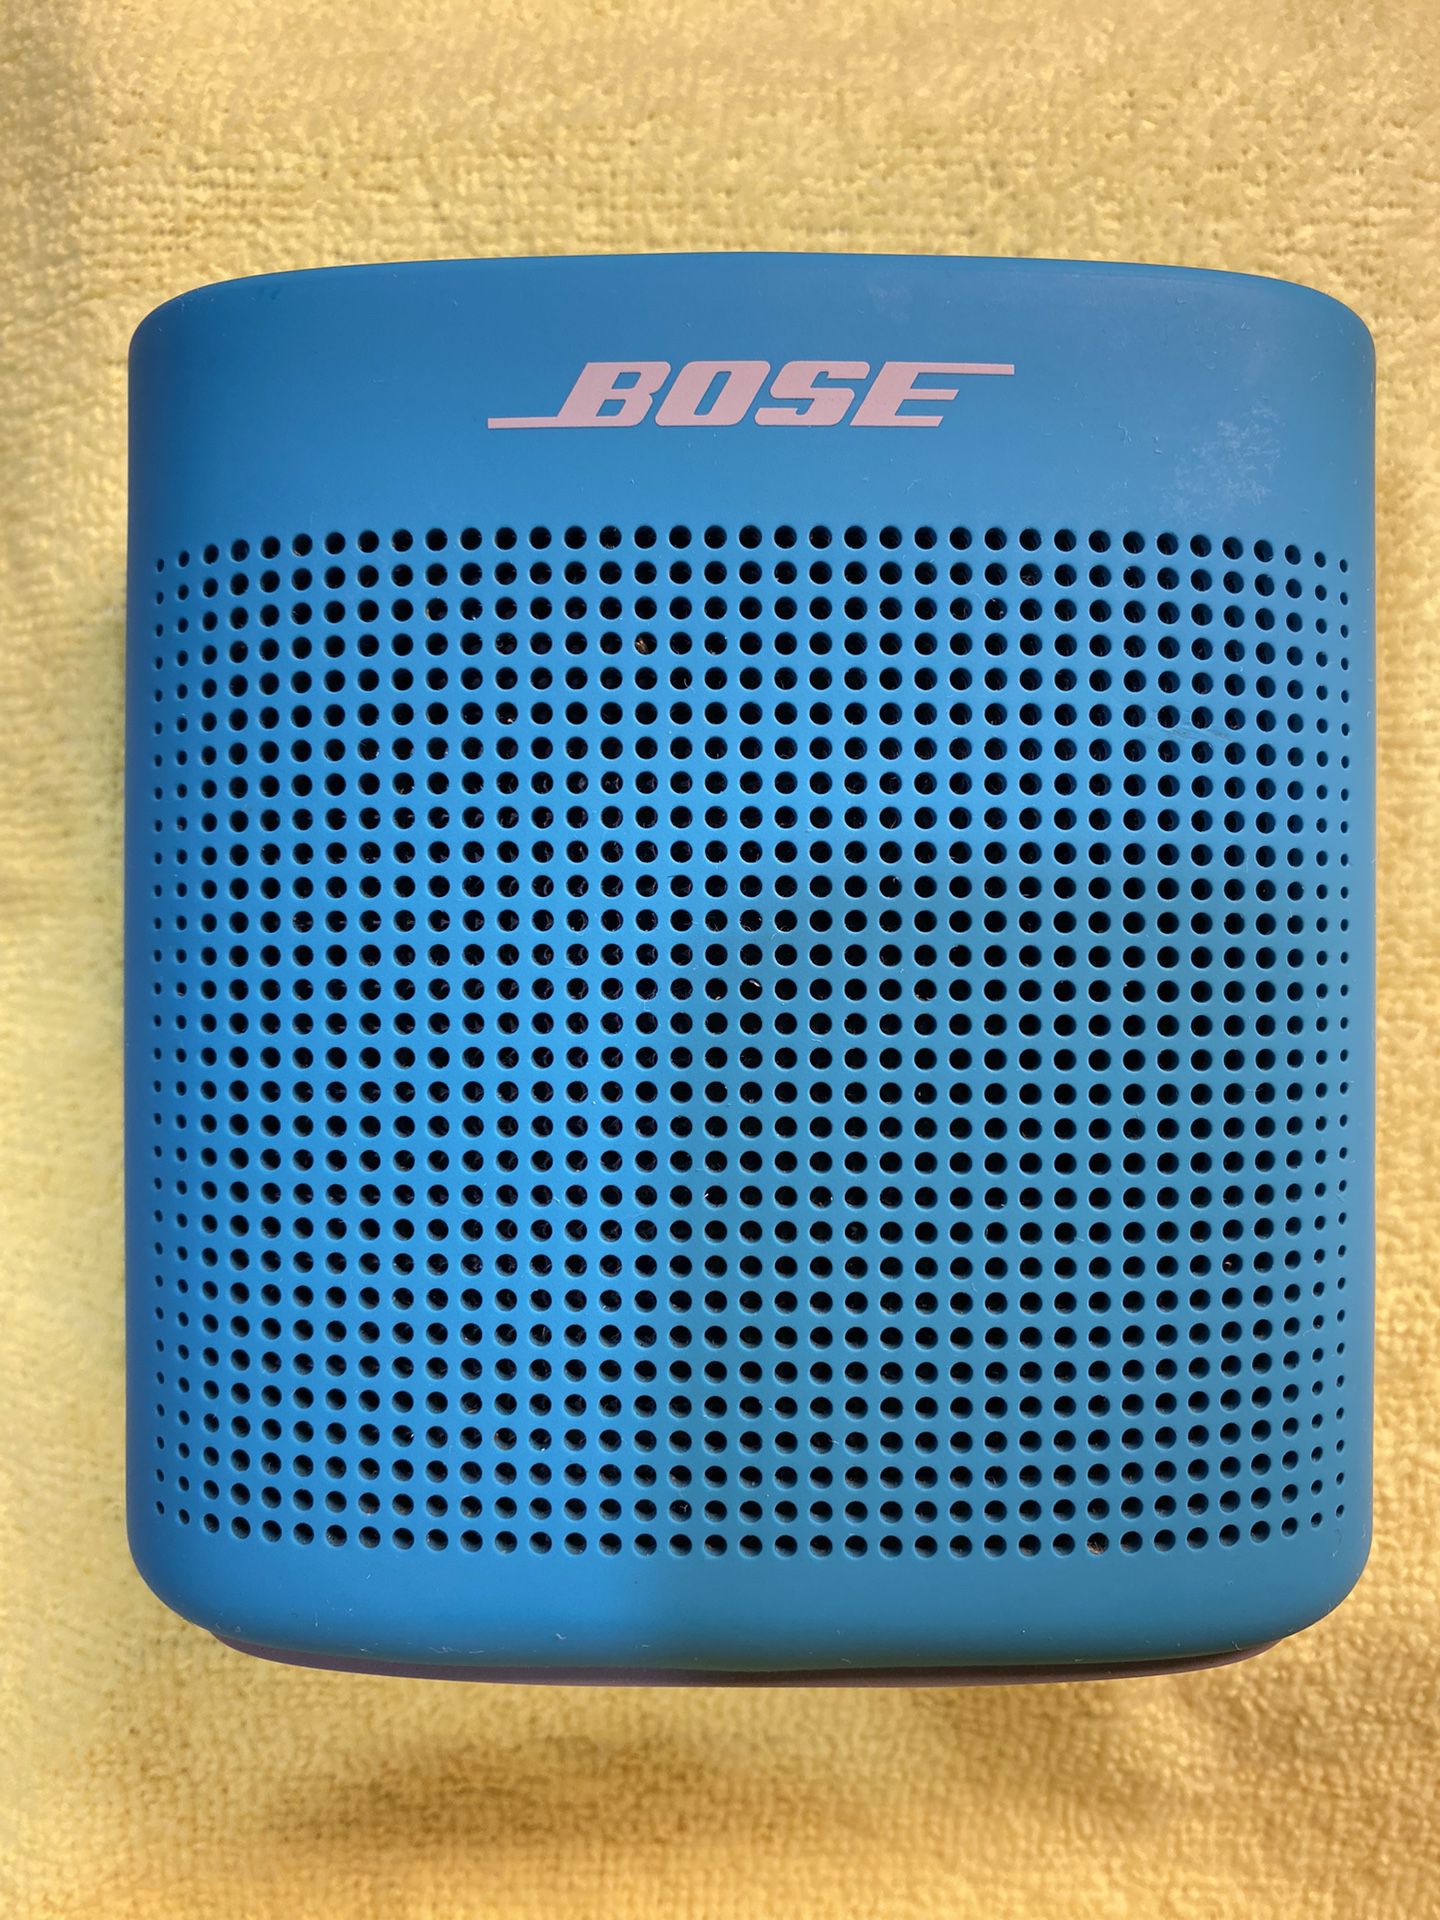 THIS IS A LIKE NEW RARELY USED BOSE SOUNDLINK COLOR